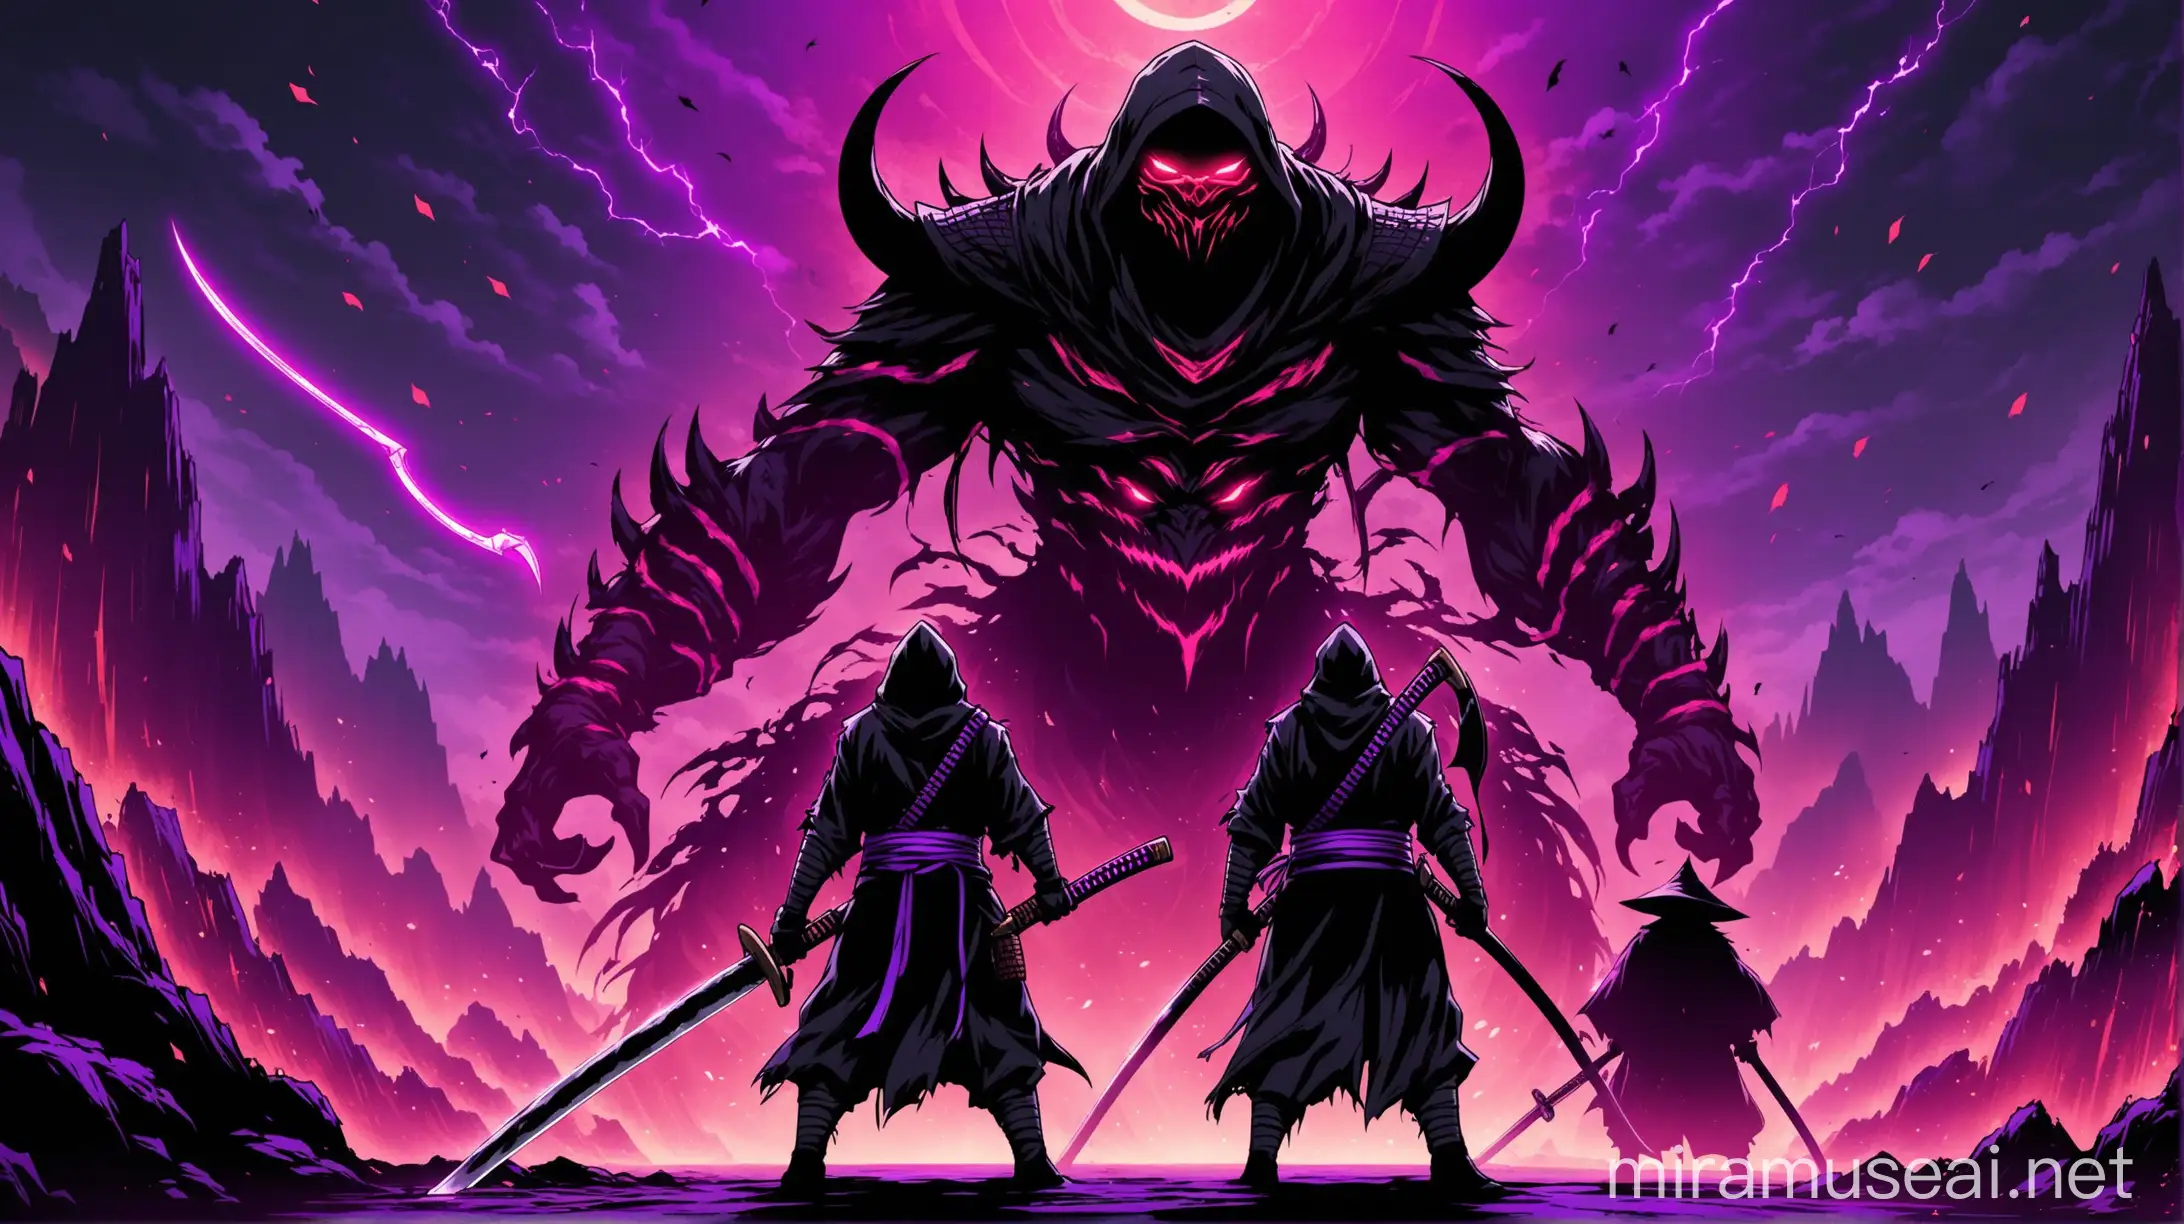 A ninja in black clothes with a katana with a red glow, stands next to a sorcerer with a scythe on his back with a purple glow. There is a defeated monster in the background.